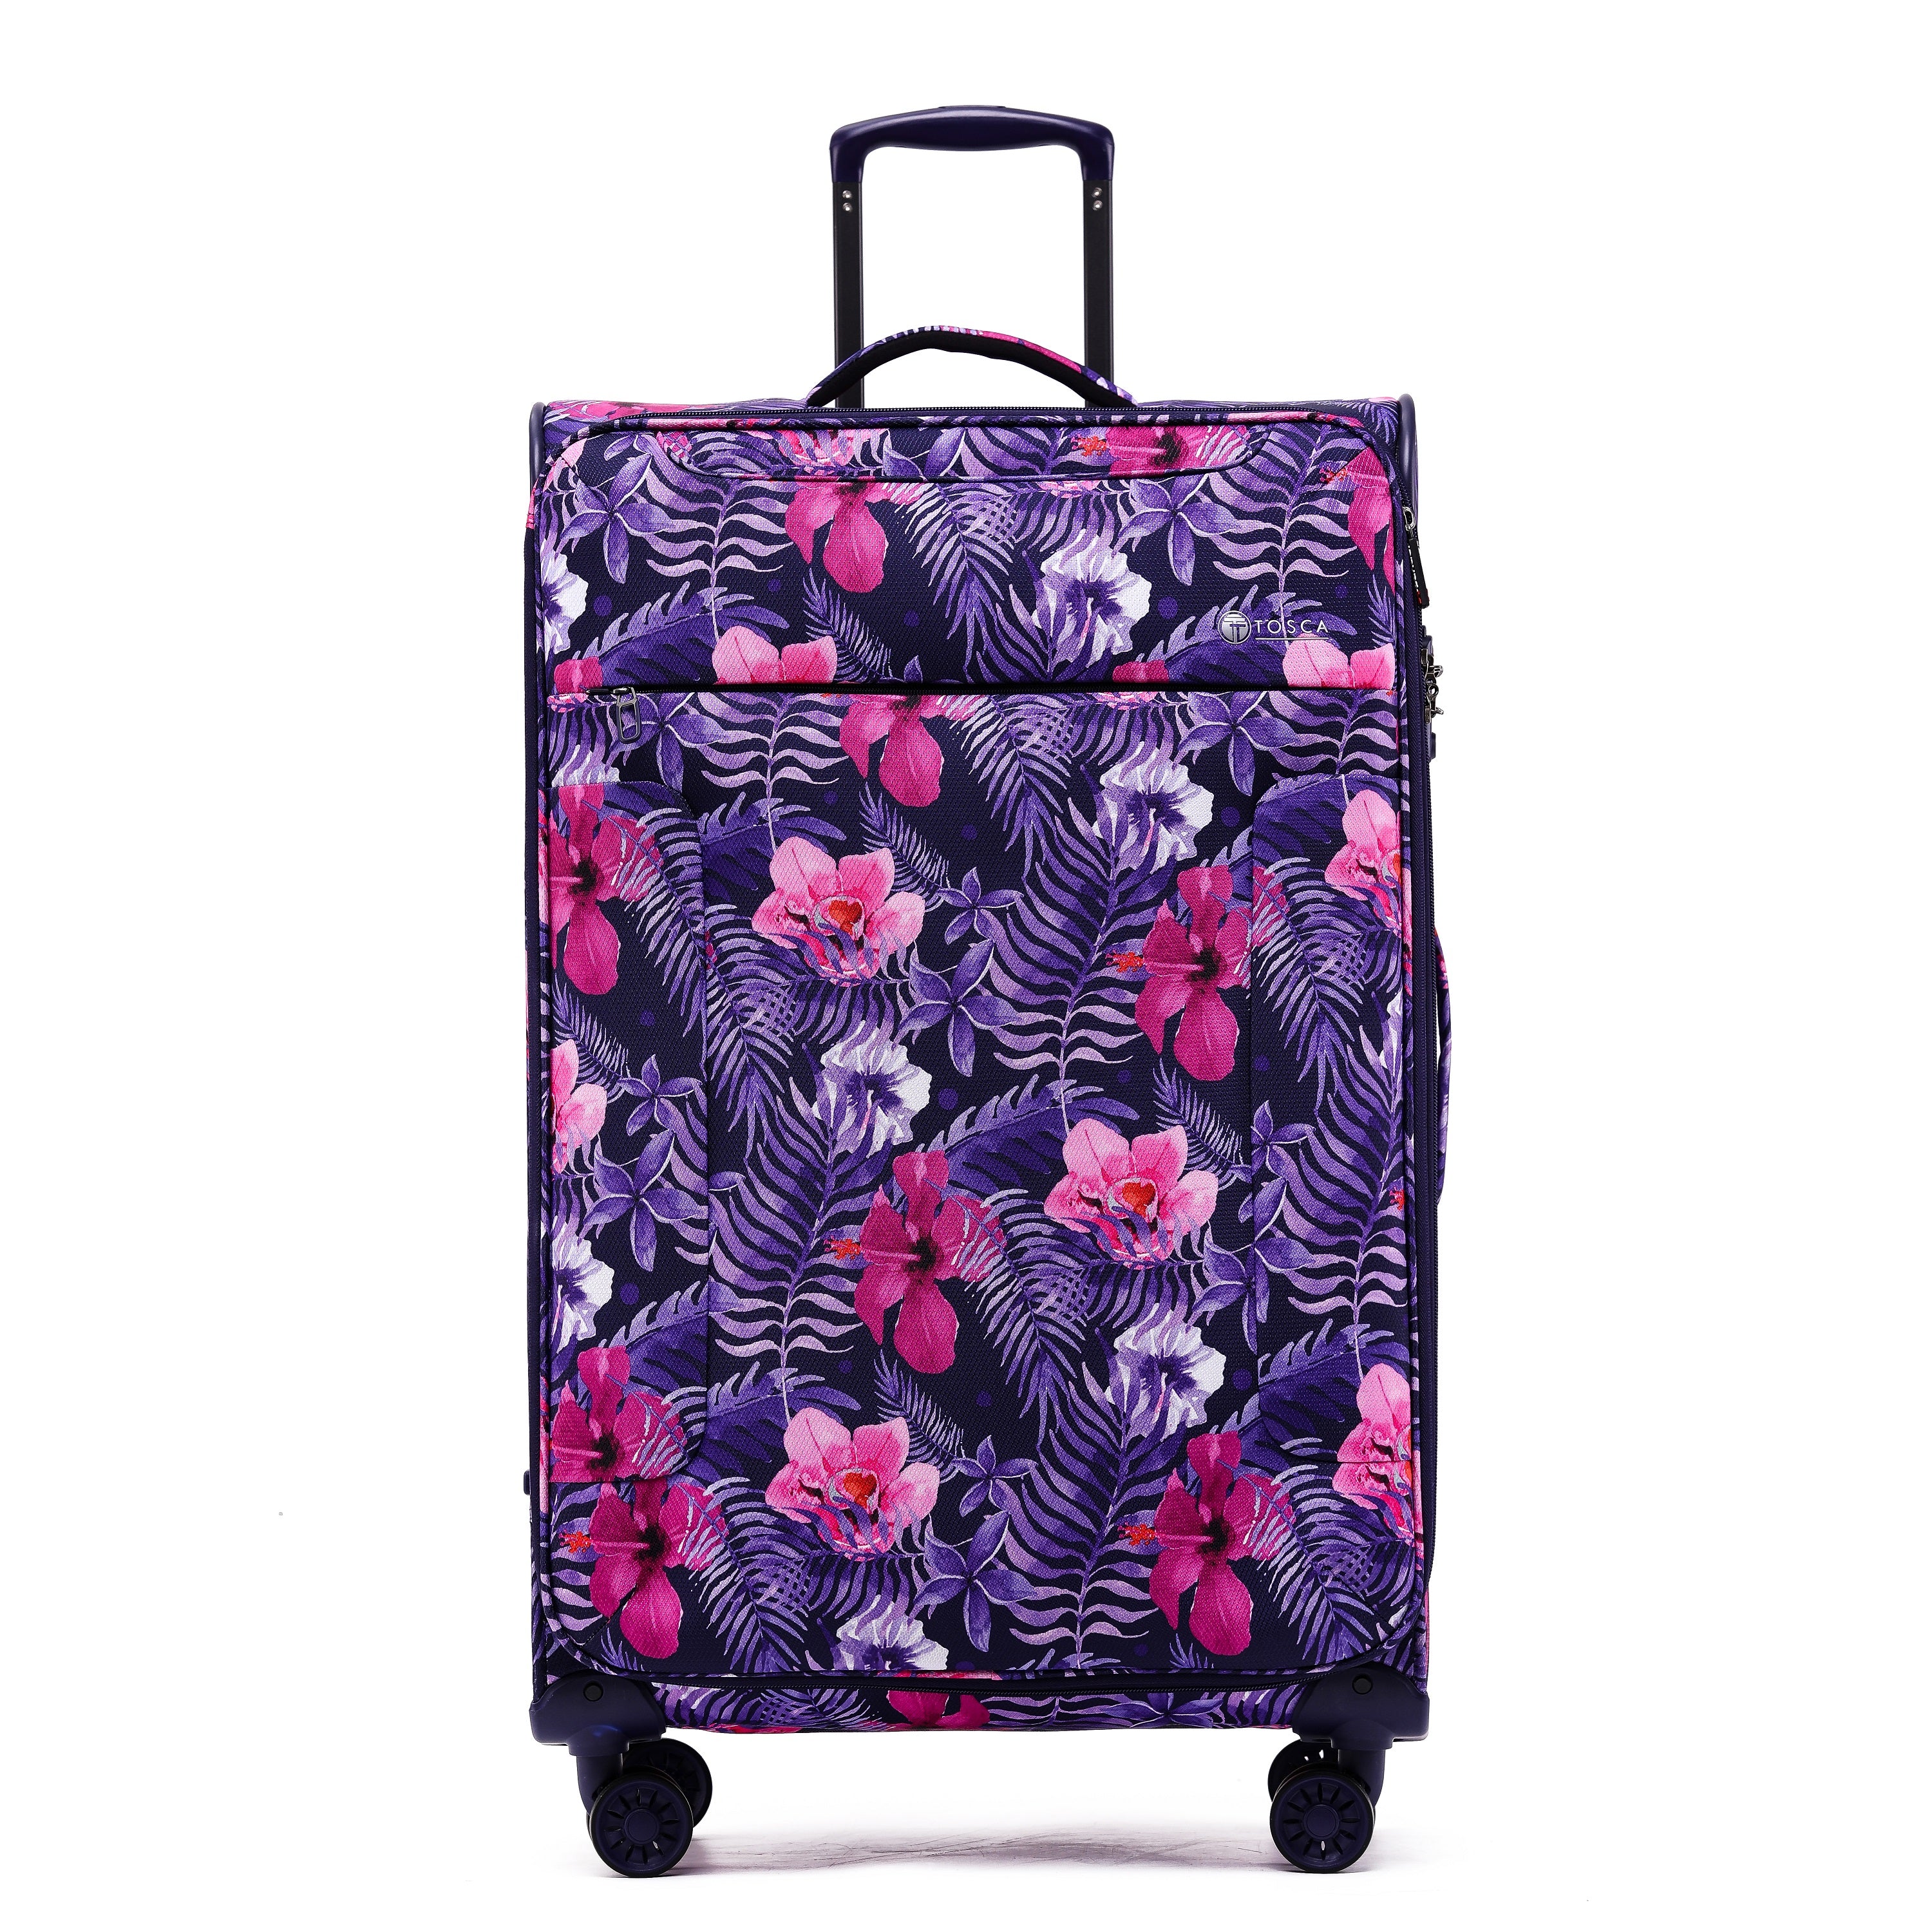 Tosca - So Lite 3.0 29in Large 4 Wheel Soft Suitcase - Flower-1